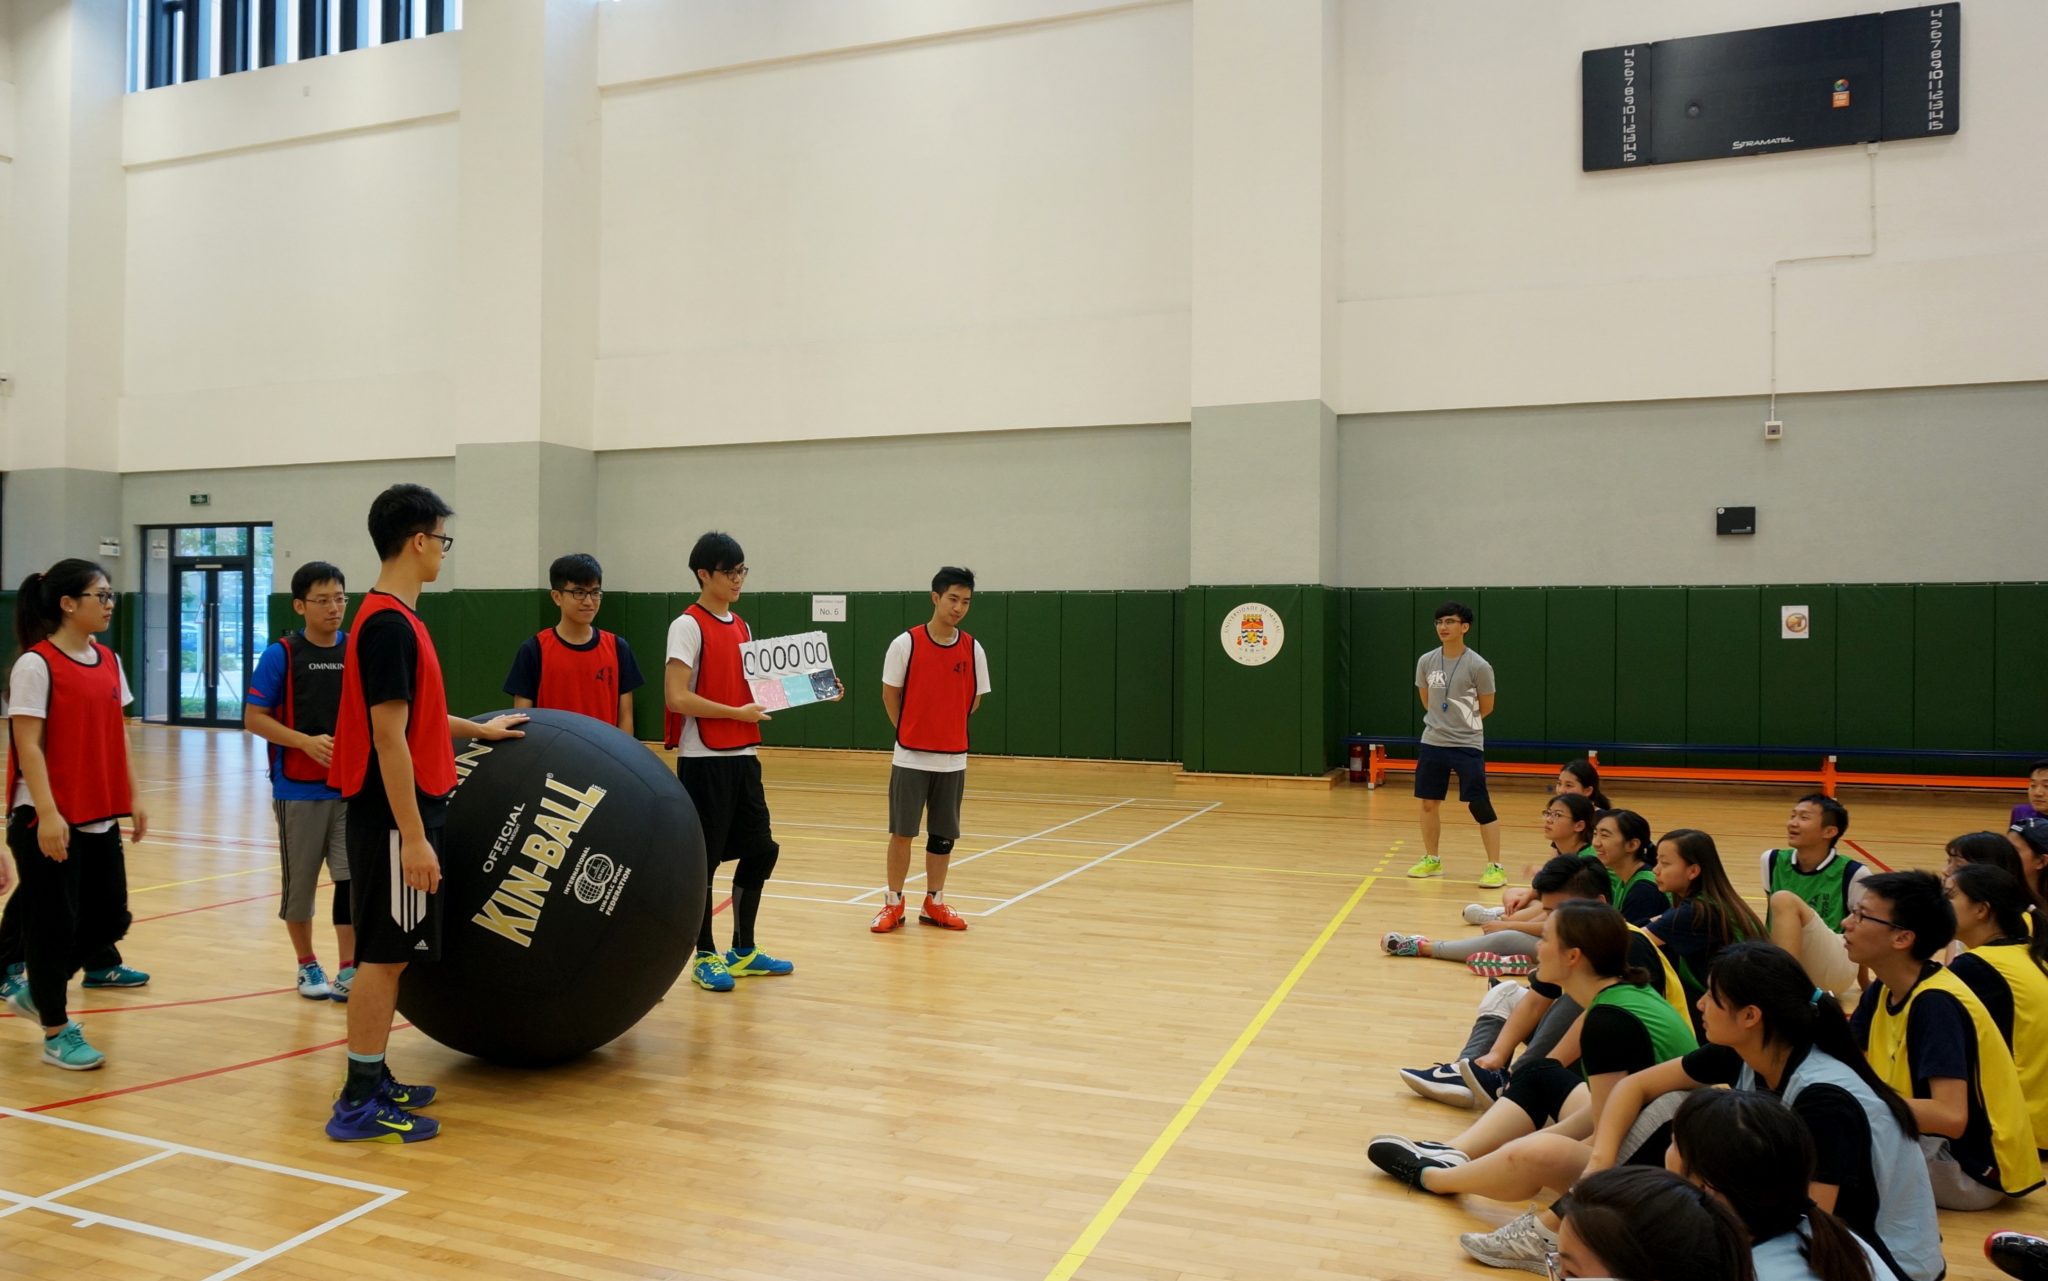 Student leaders took turns in teams to explain rules of kin-ball to each other. 學生領袖分小組輪流向其他小組講解健球的規則。